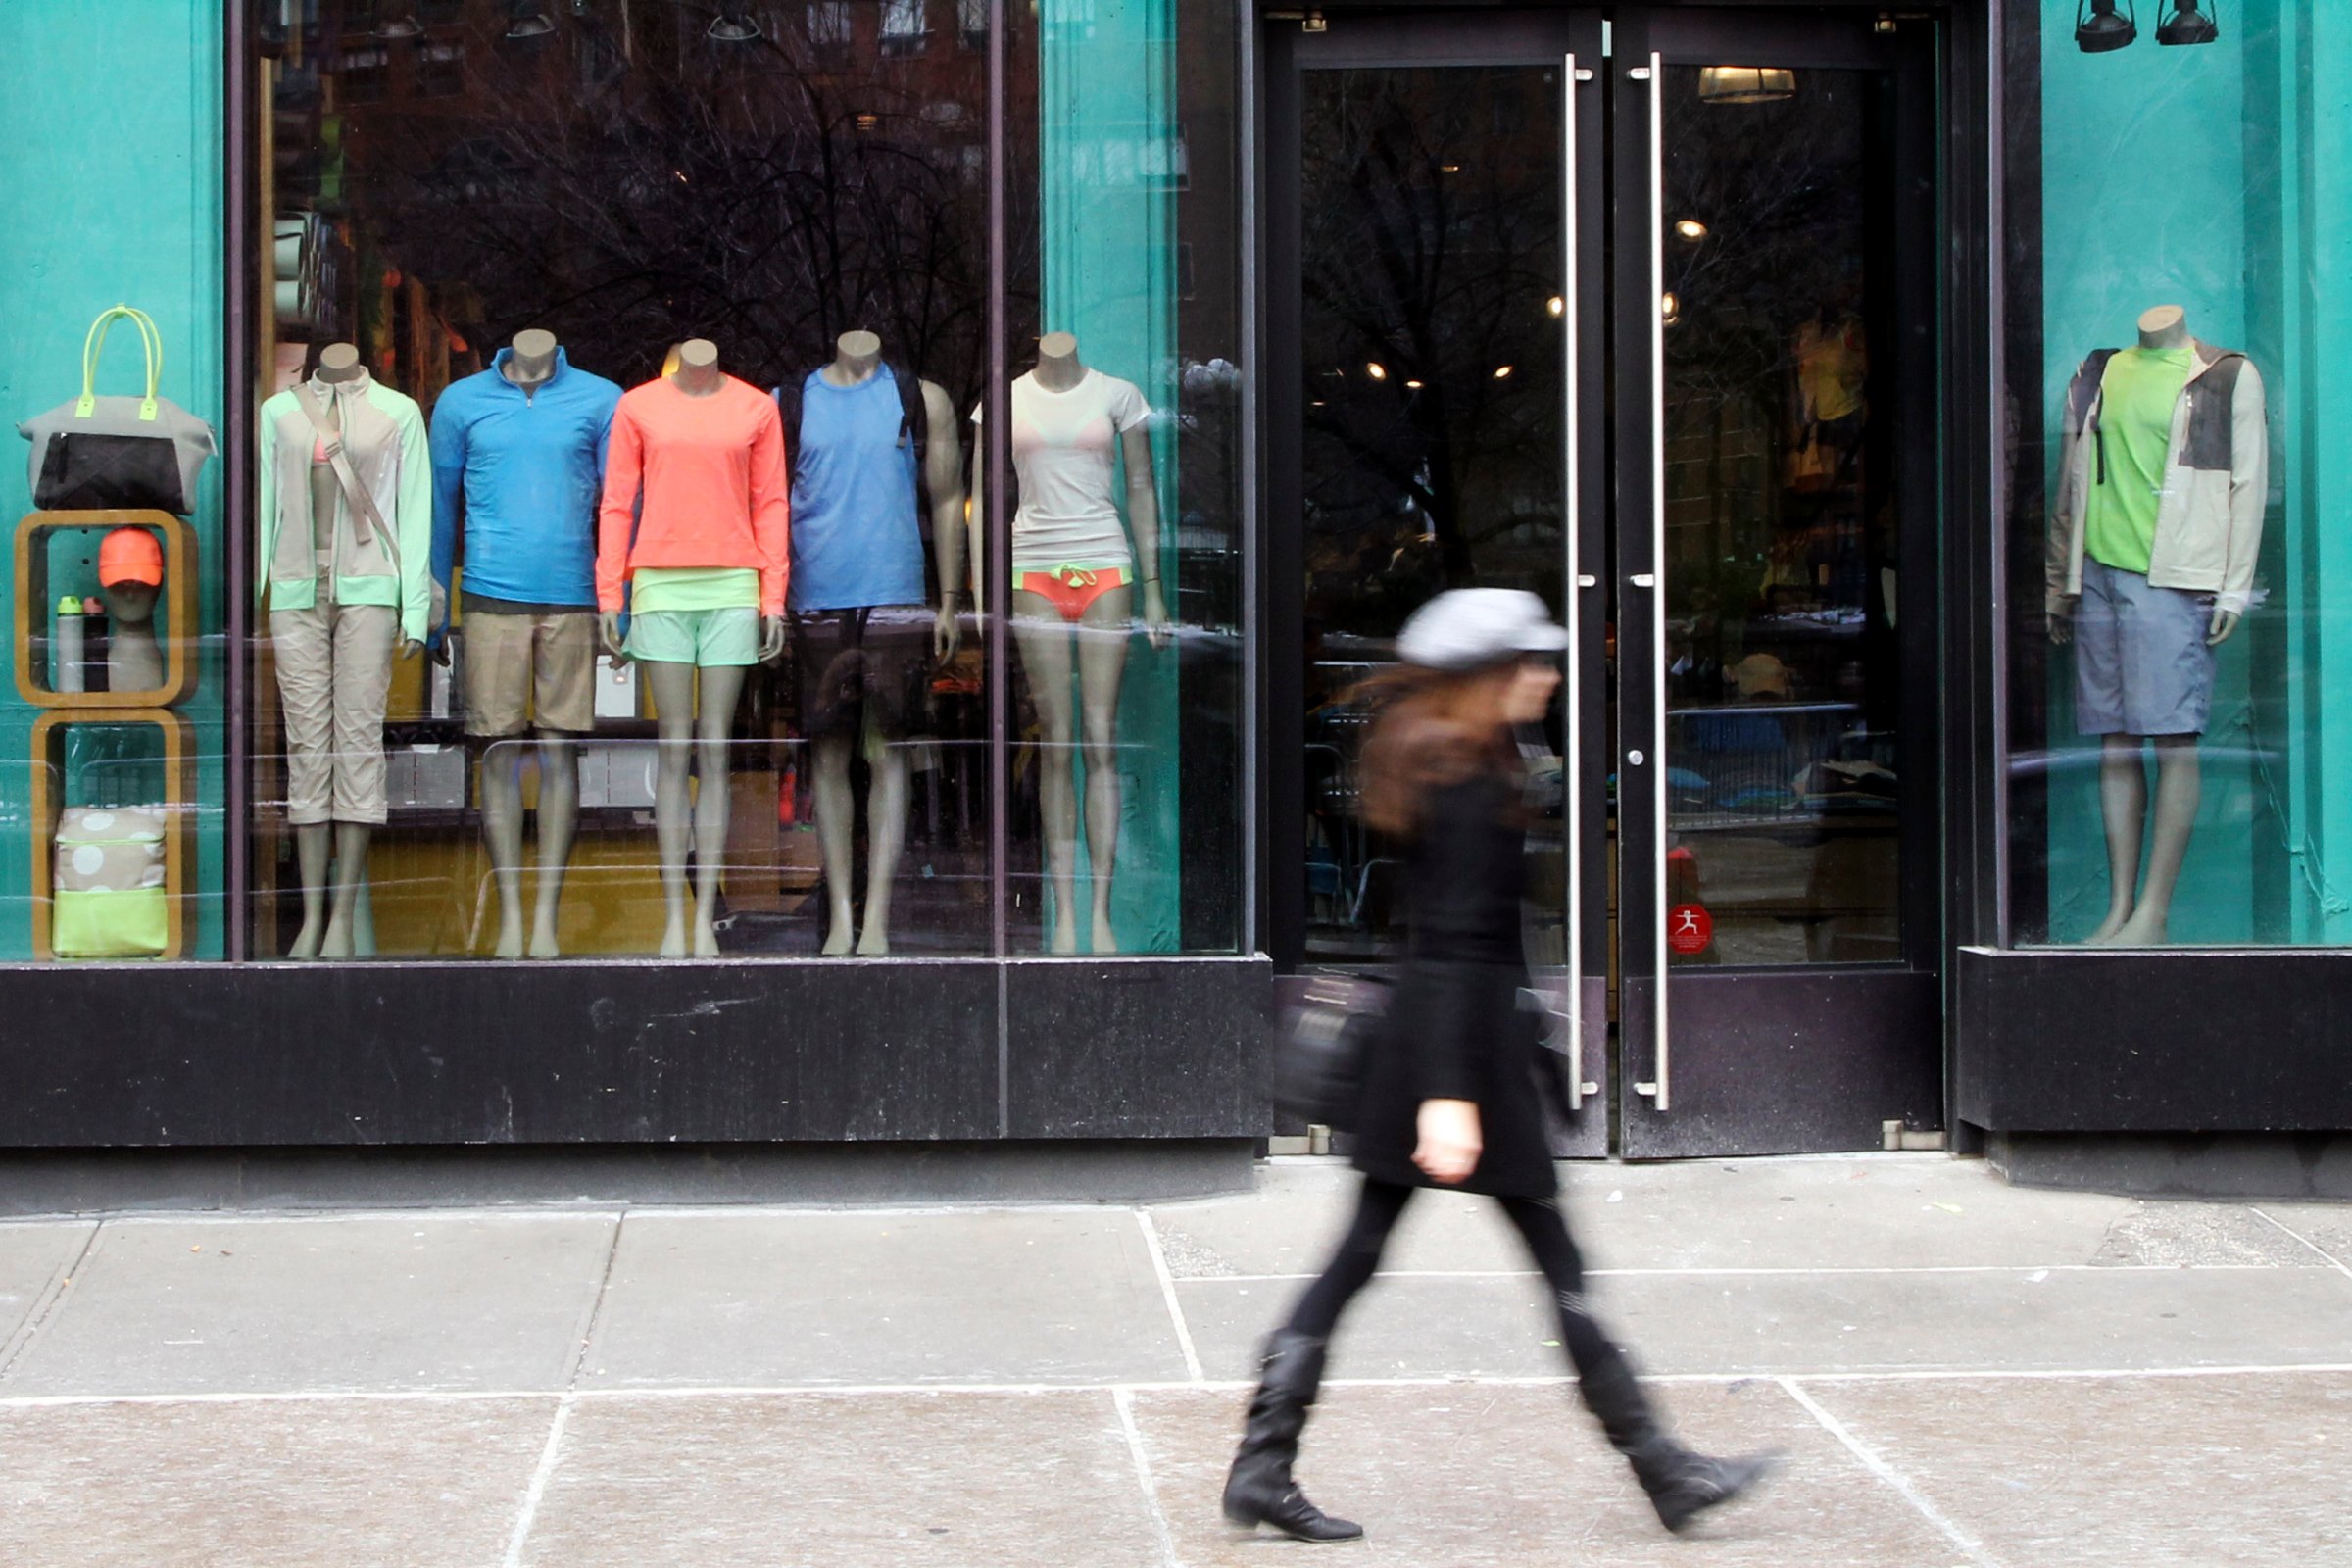 A pedestrian walks past the Lululemon Athletica store at Union Square in New York, March 19, 2013.